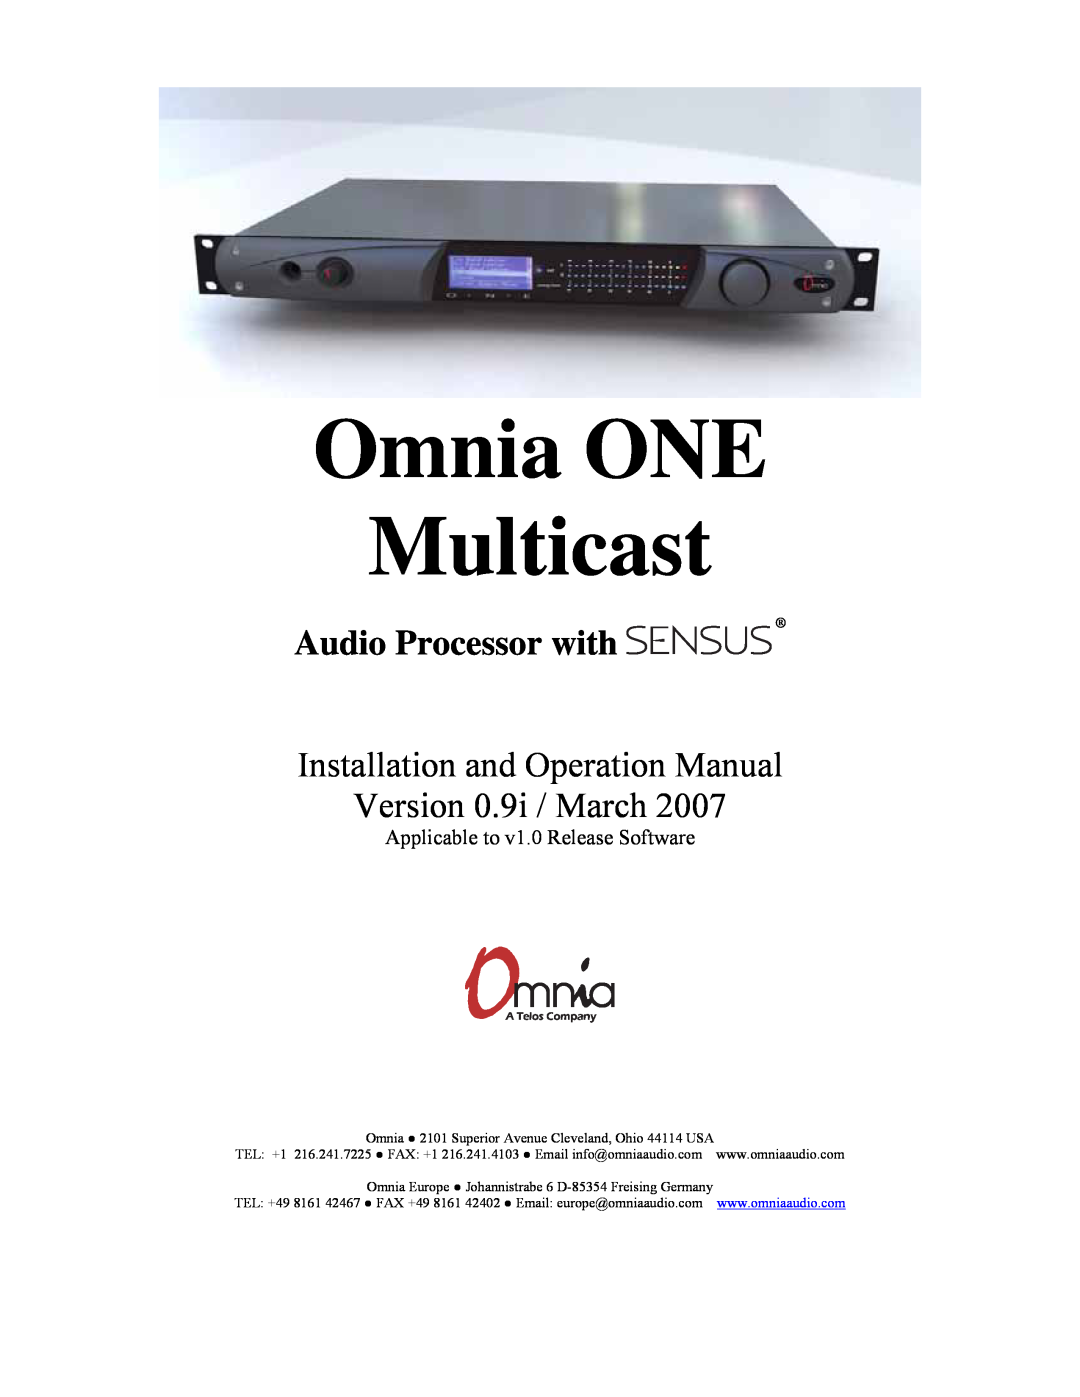 New Media Technology Omnia ONE Multicast manual Installation and Operation Manual Version 0.9i / March, A Telos Company 